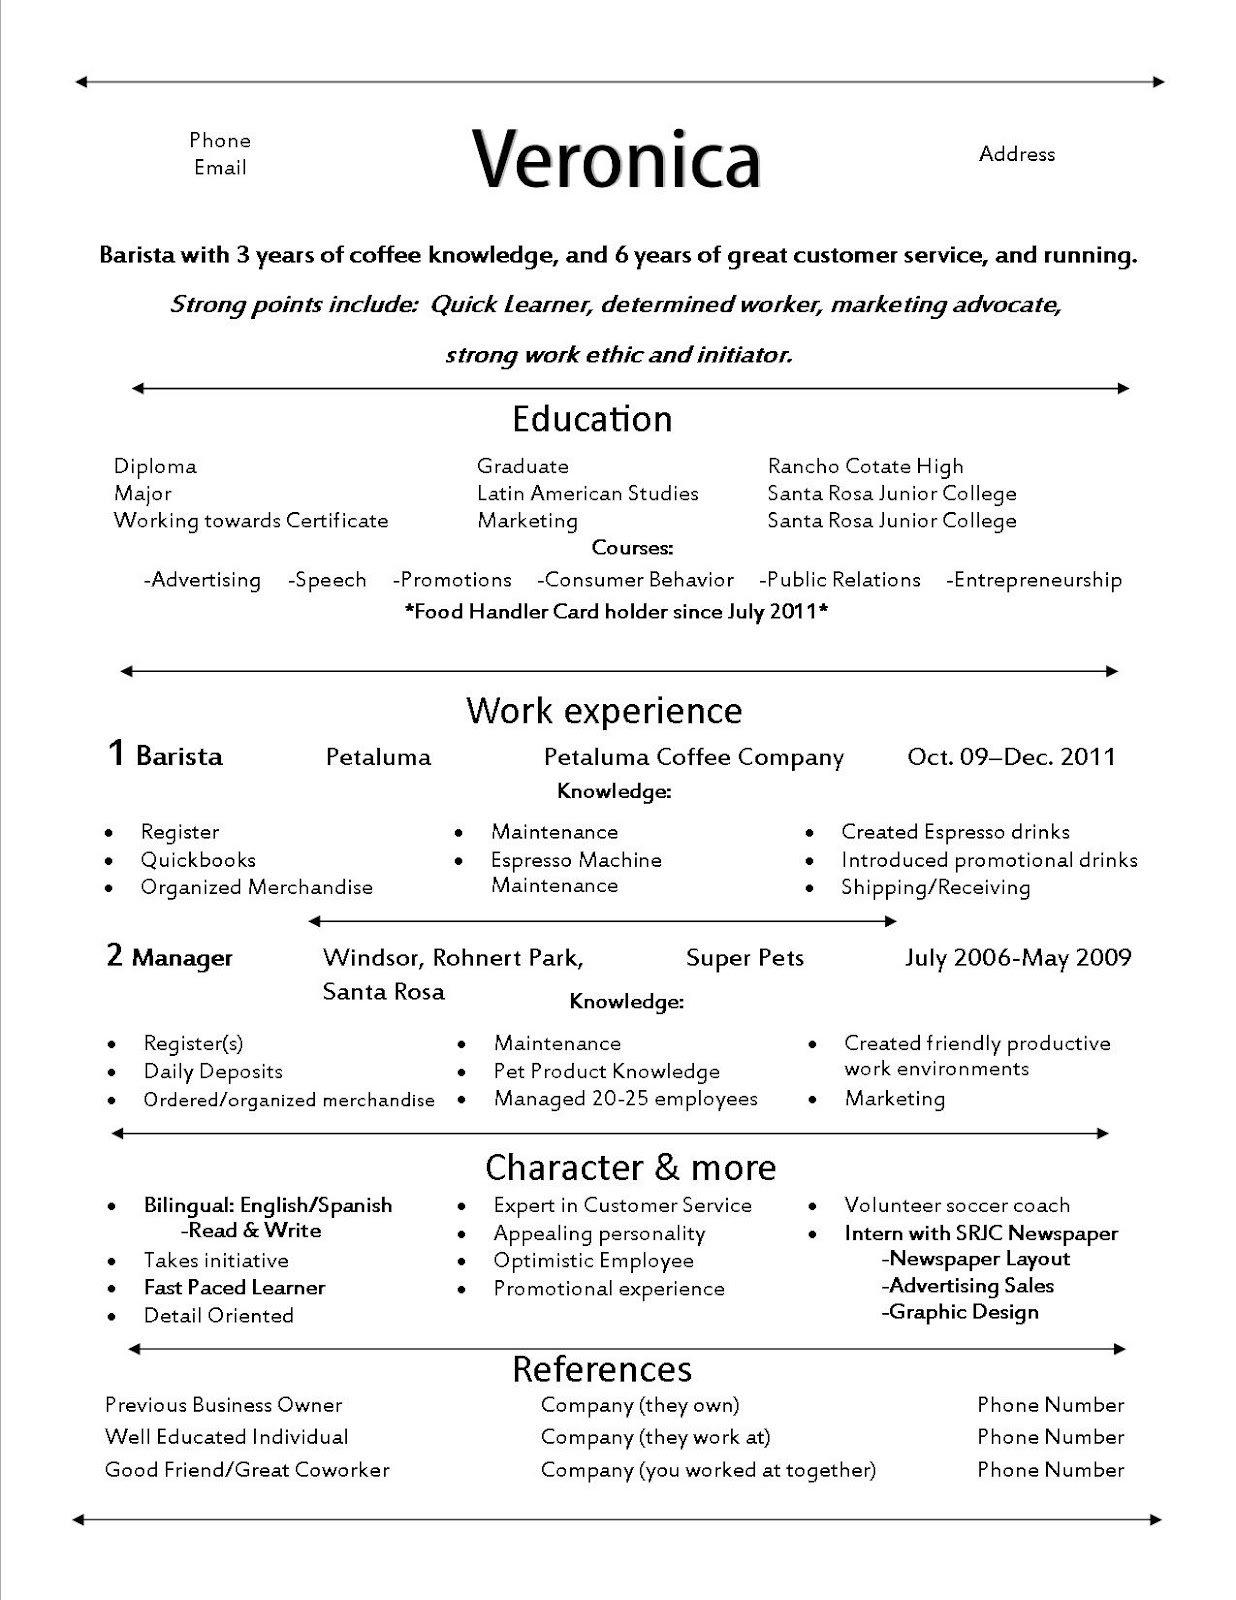 How to make a stand out resume